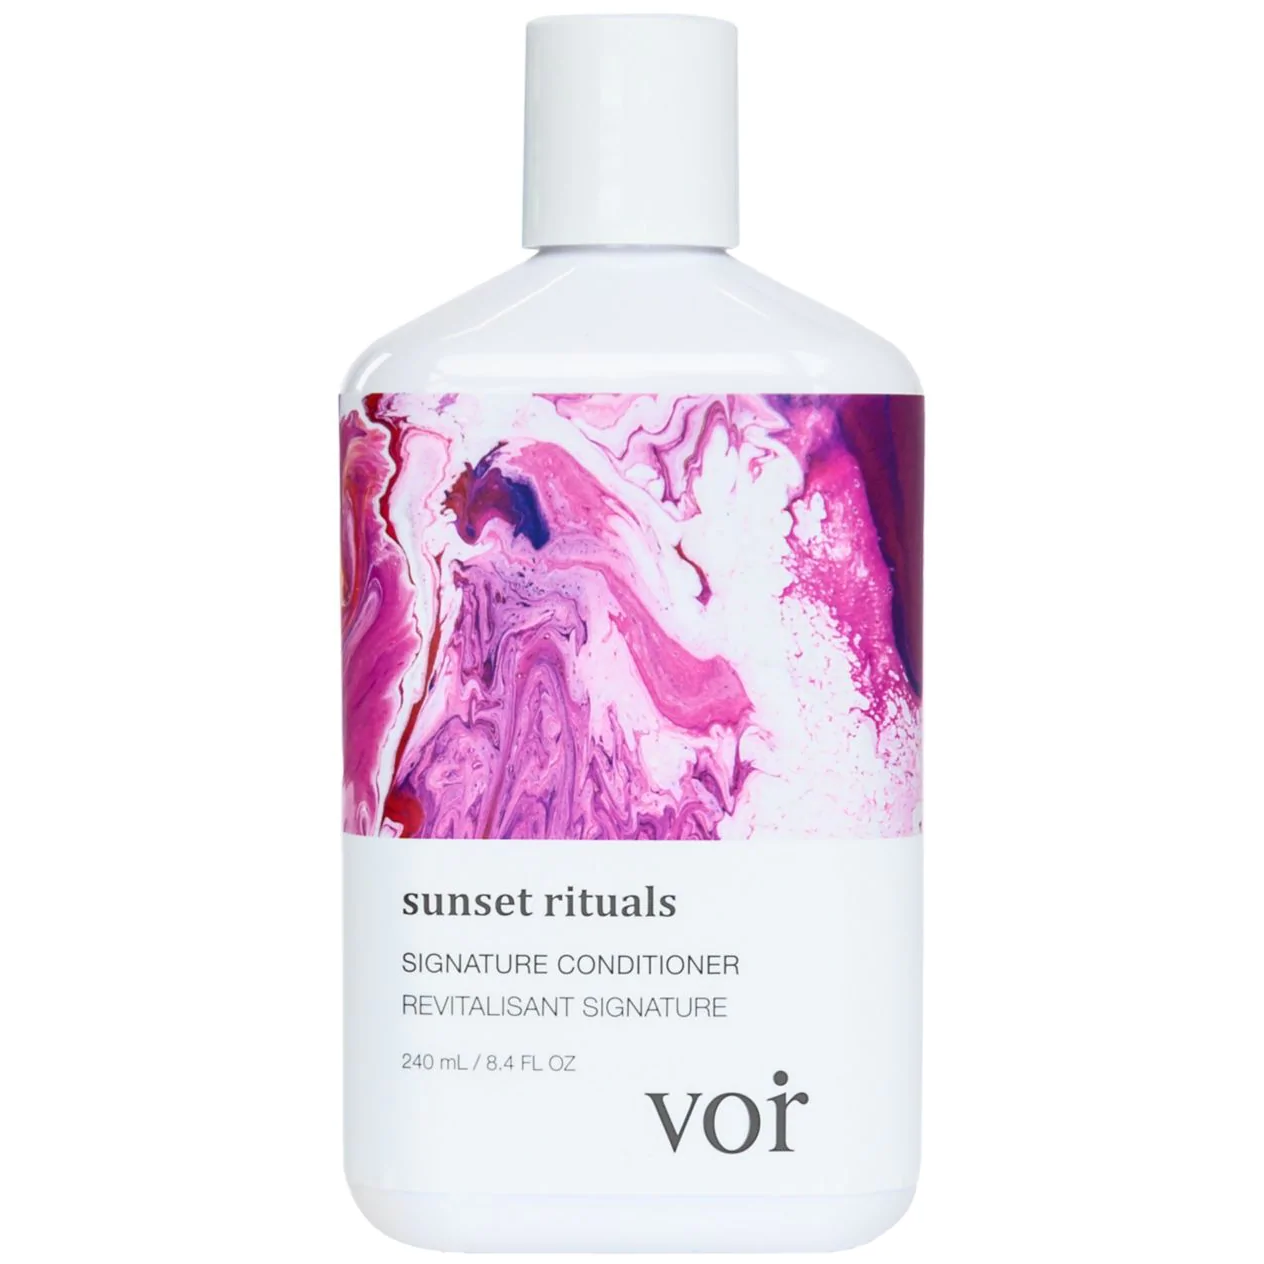 Voir Haircare Sunset Rituals Signature Conditioner at Socialite Beauty Canada